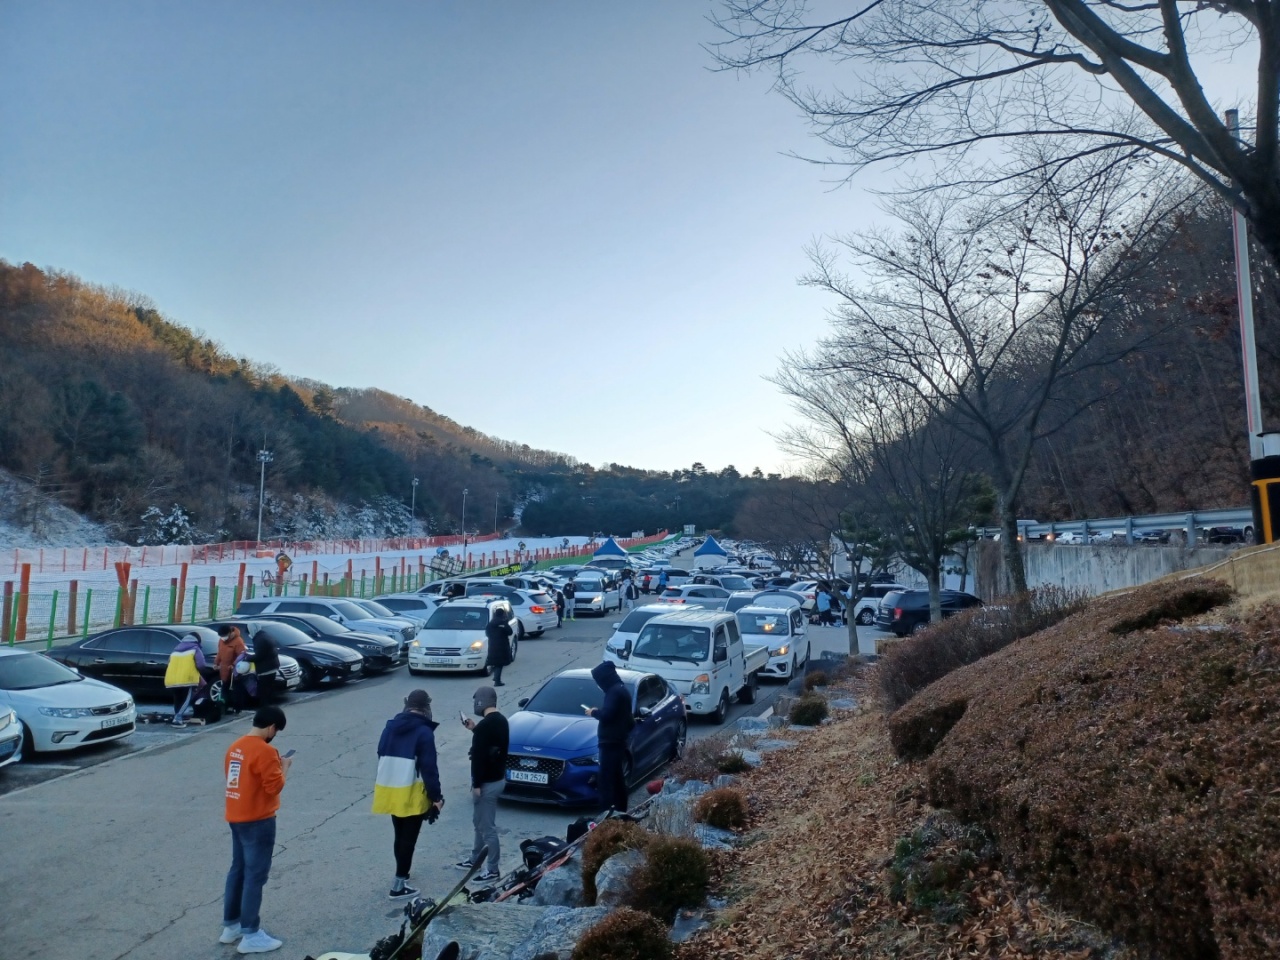 Visitors get ready to ski and snowboard after renting equipment at Vivaldi Park in Hongcheon, Gangwon Province, Dec. 4. (Lee Si-jin/The Korea Herald)